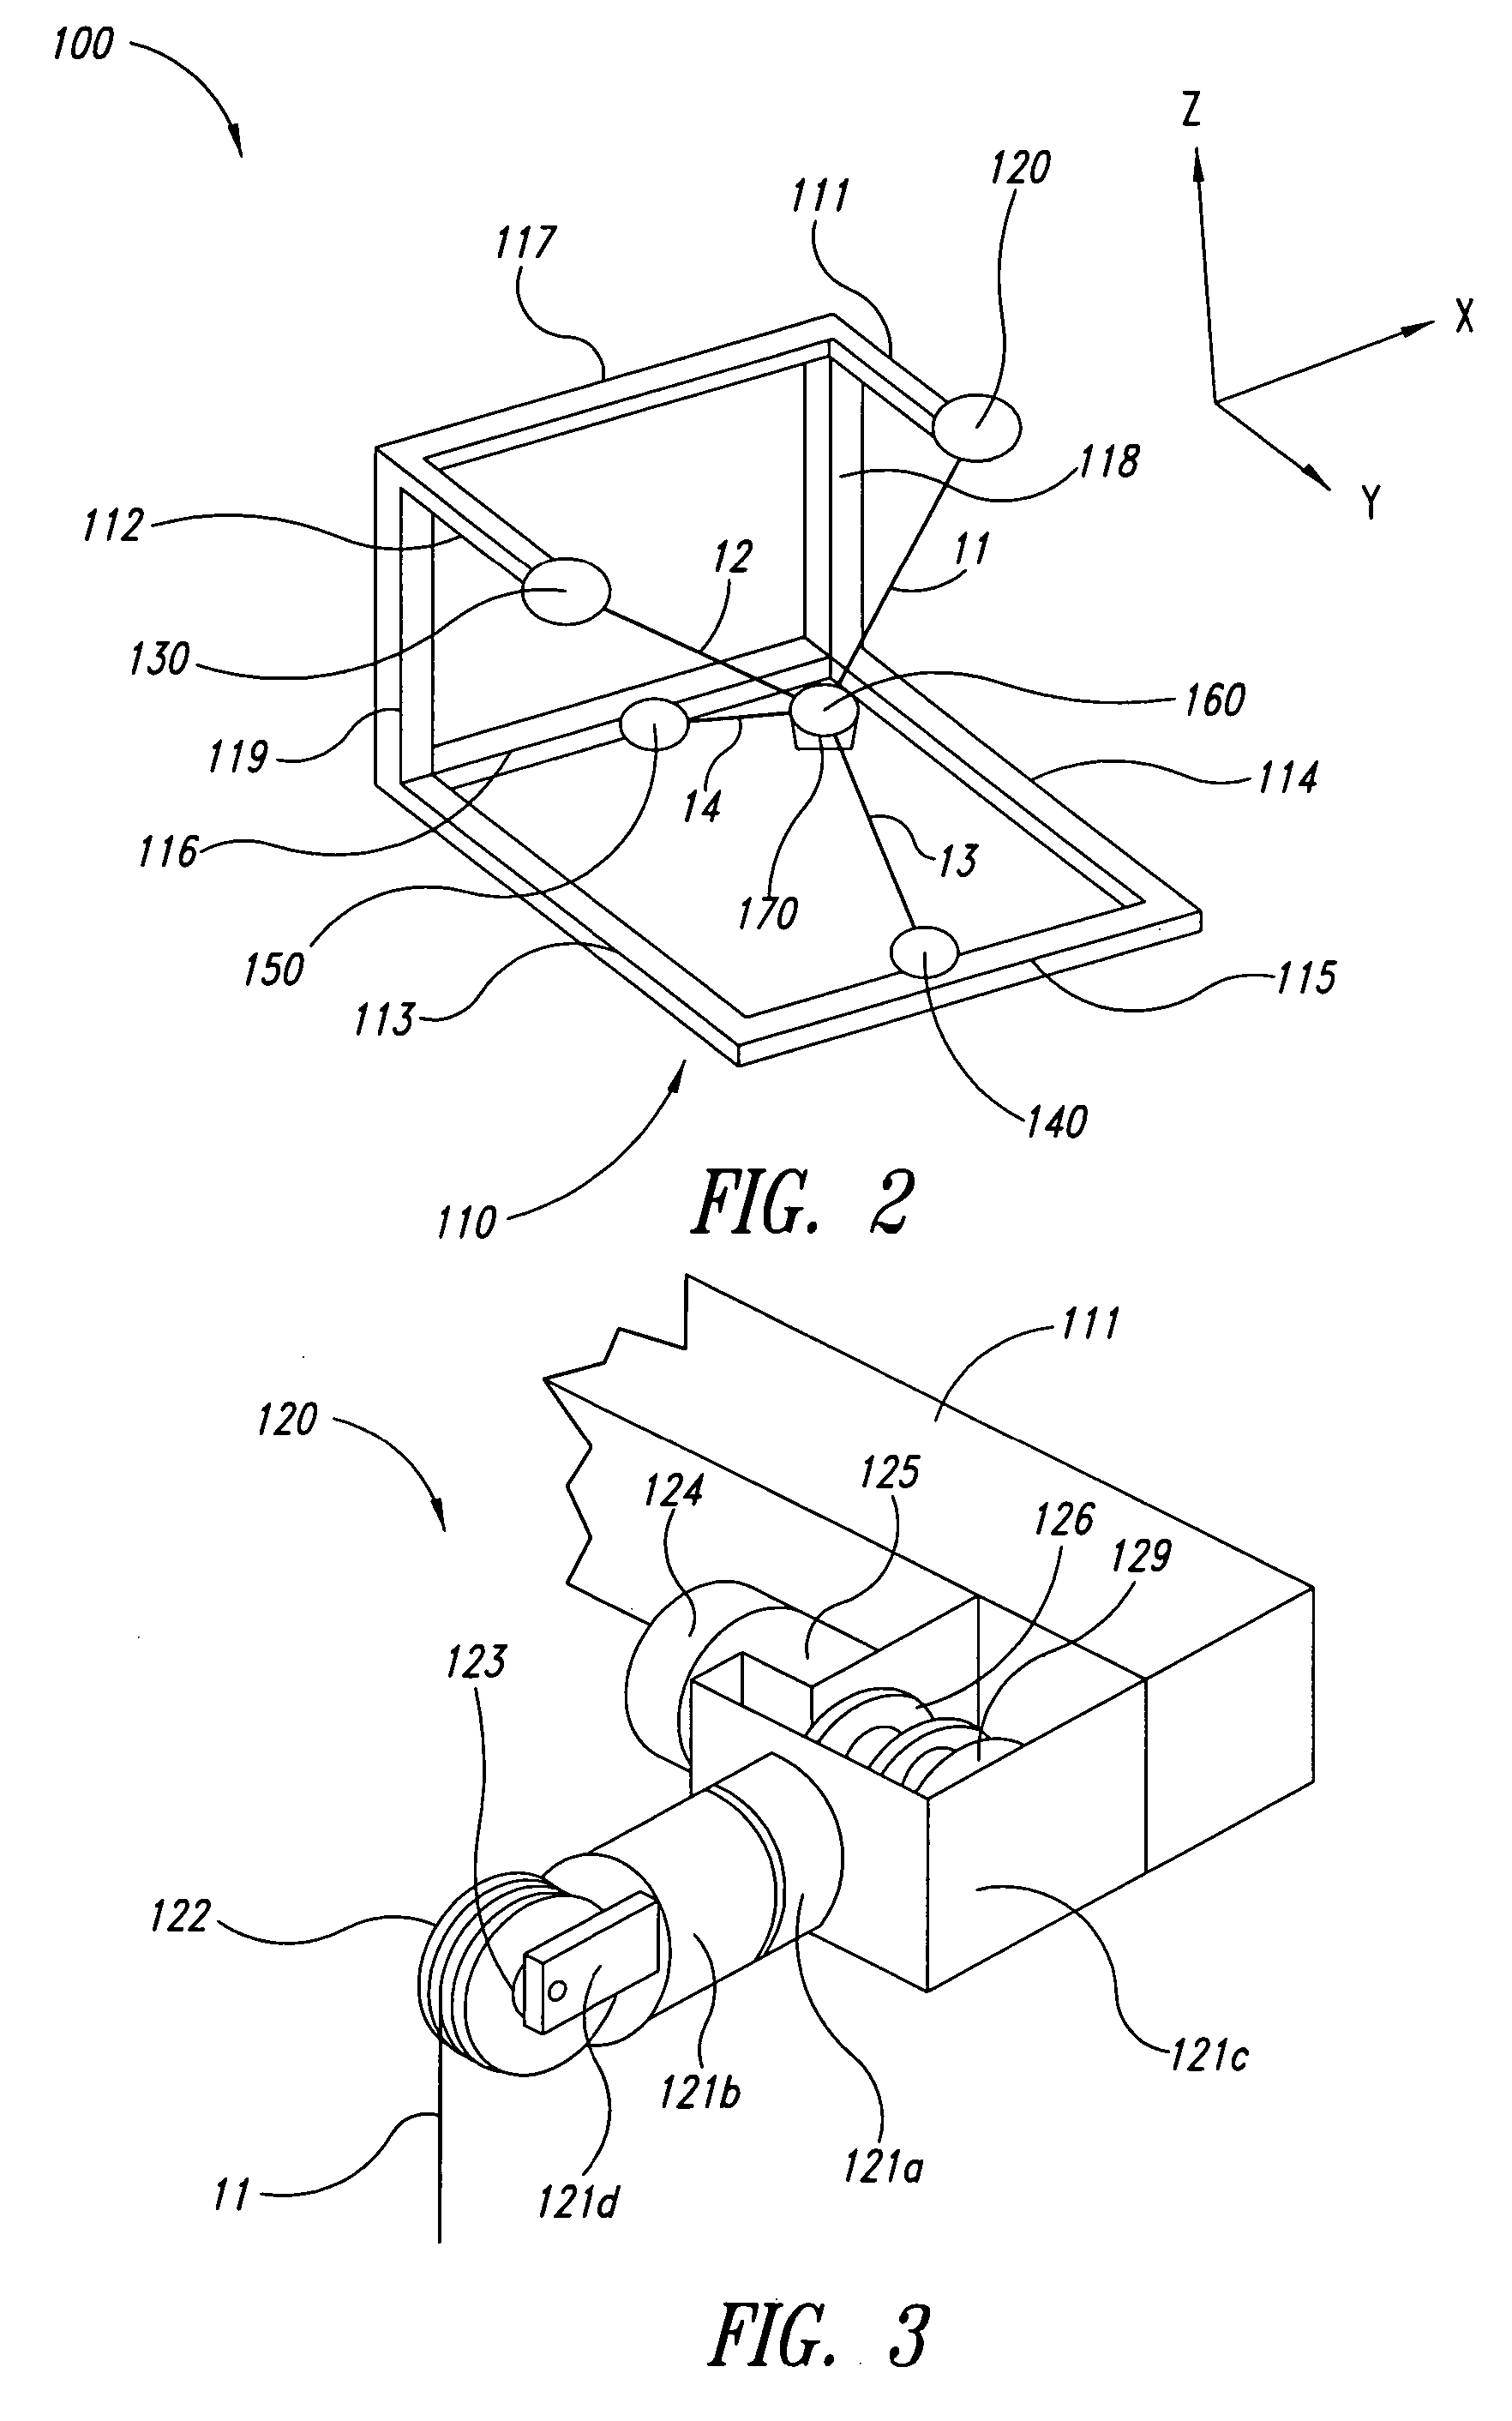 Method, apparatus, and article for force feedback based on tension control and tracking through cables